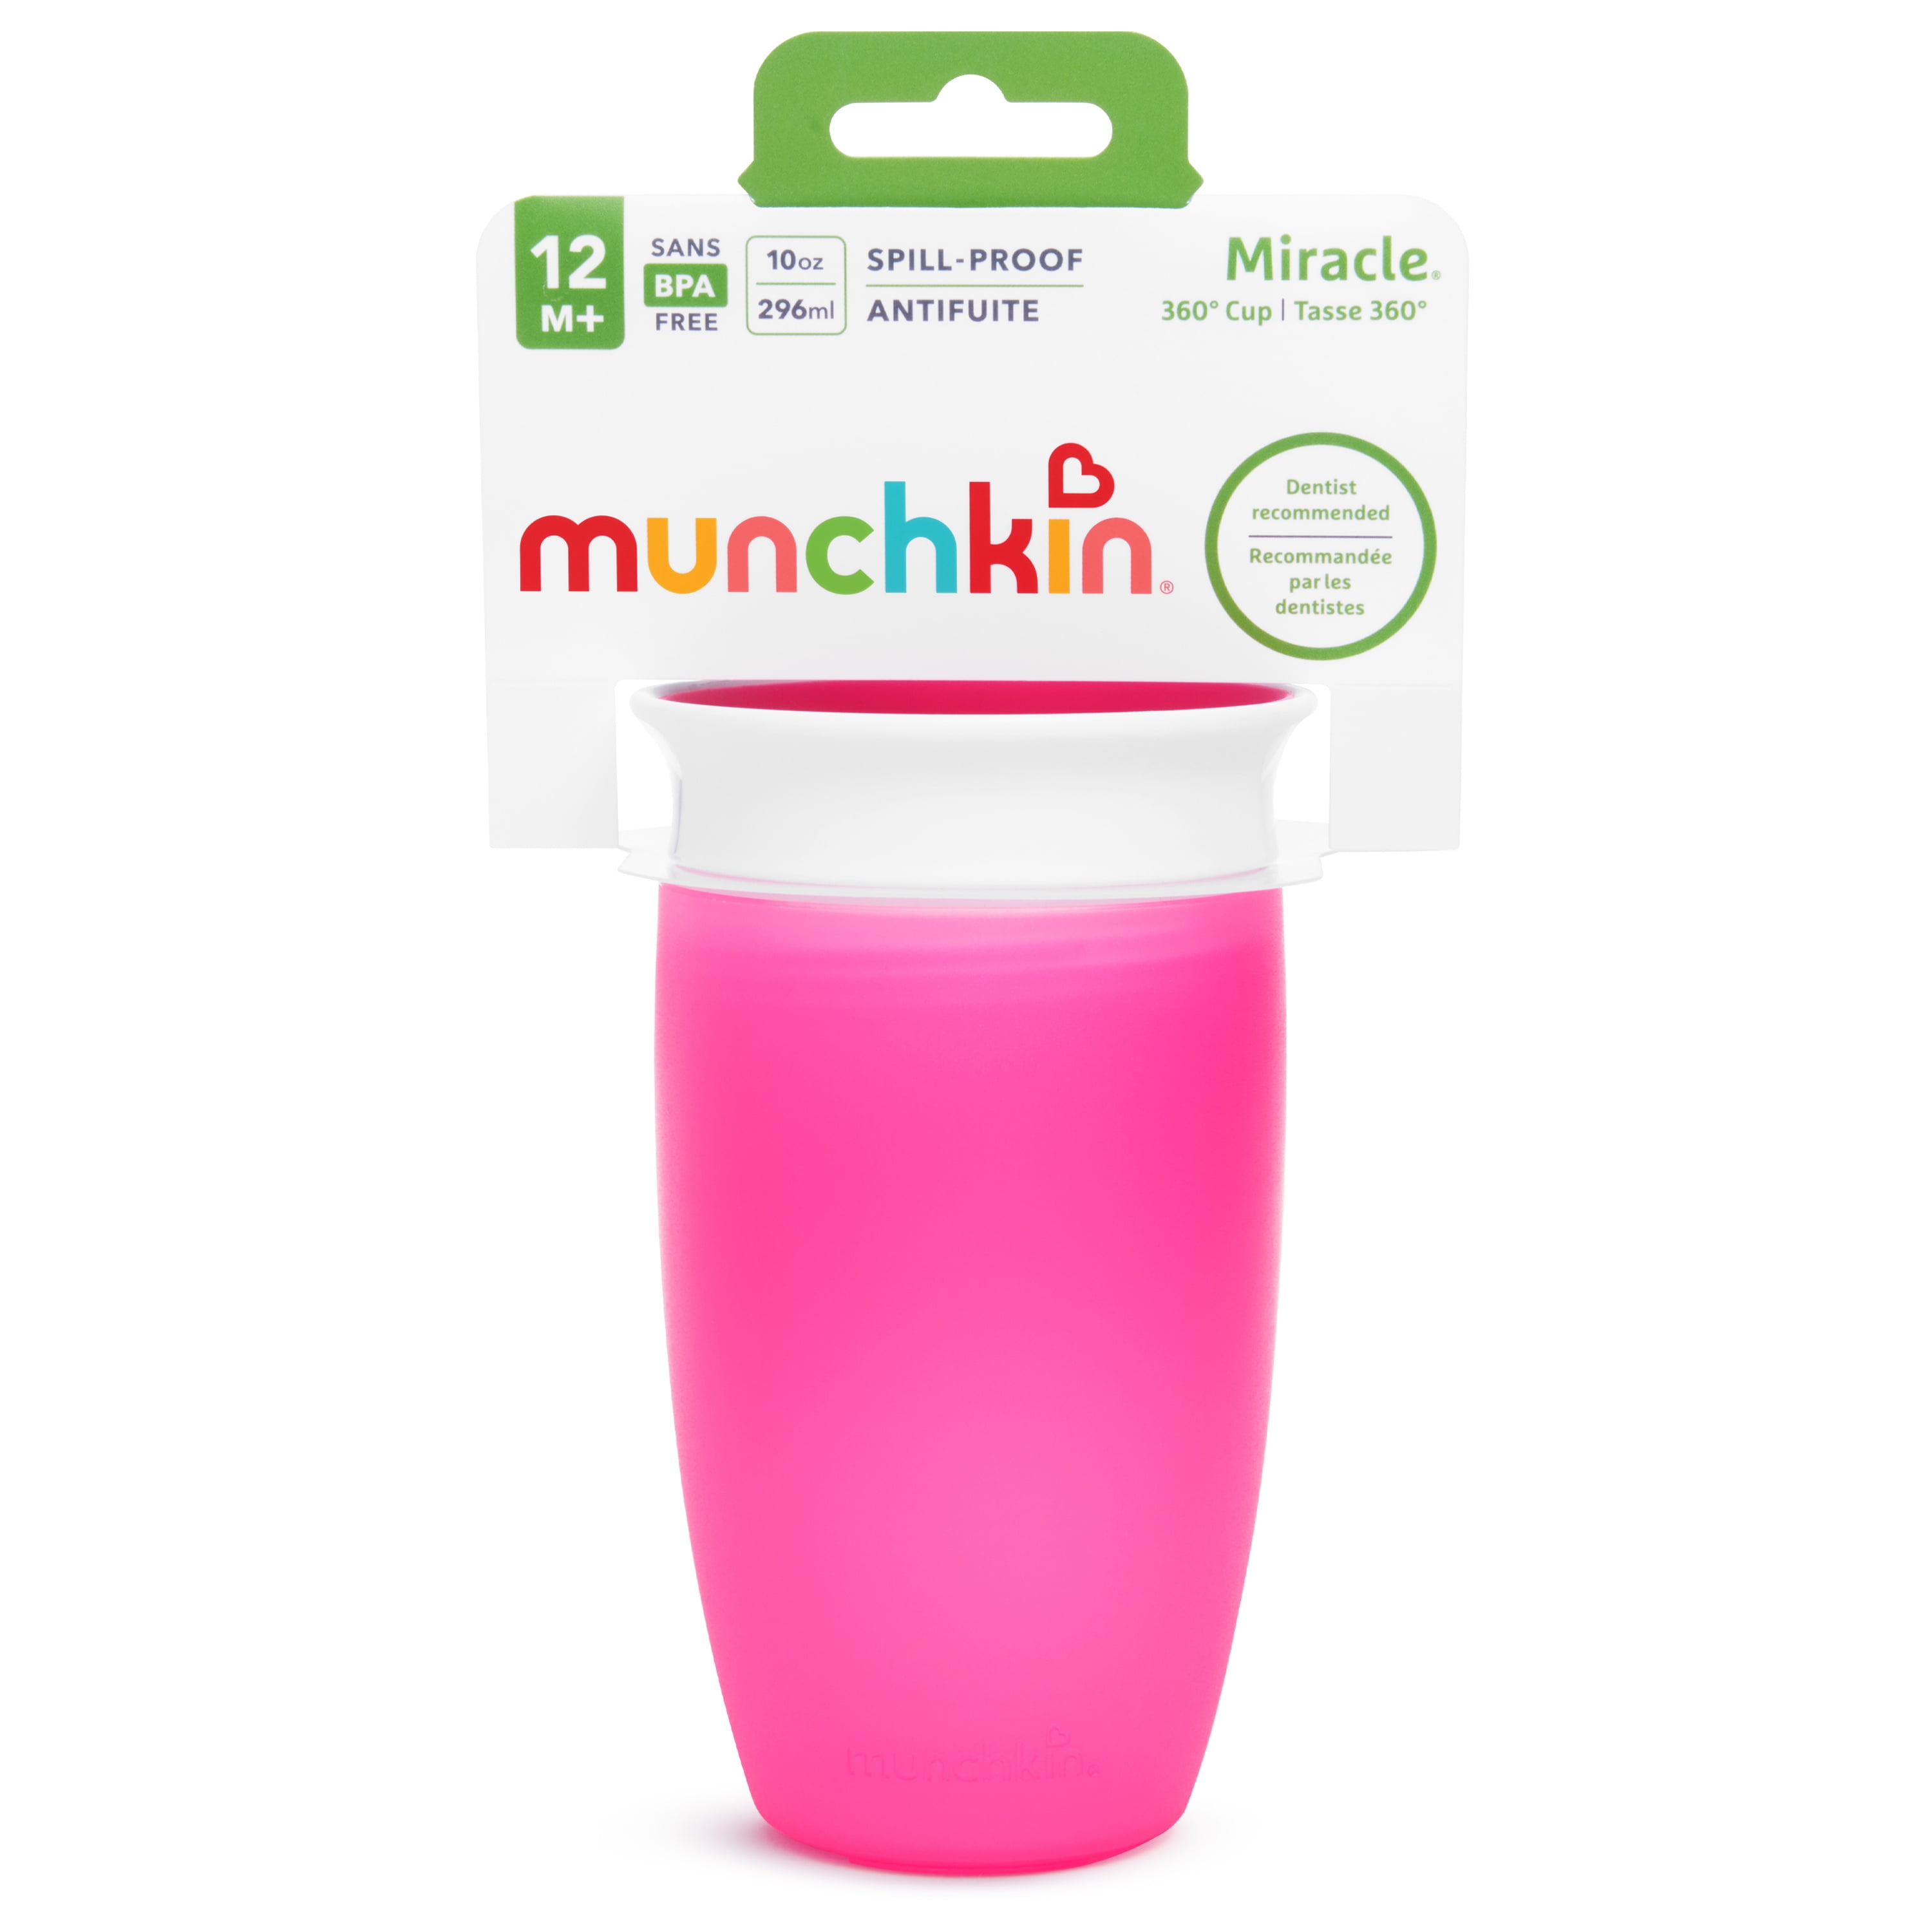 Munchkin Miracle 360 Cup / Tasse 10 Oz T1 for sale online